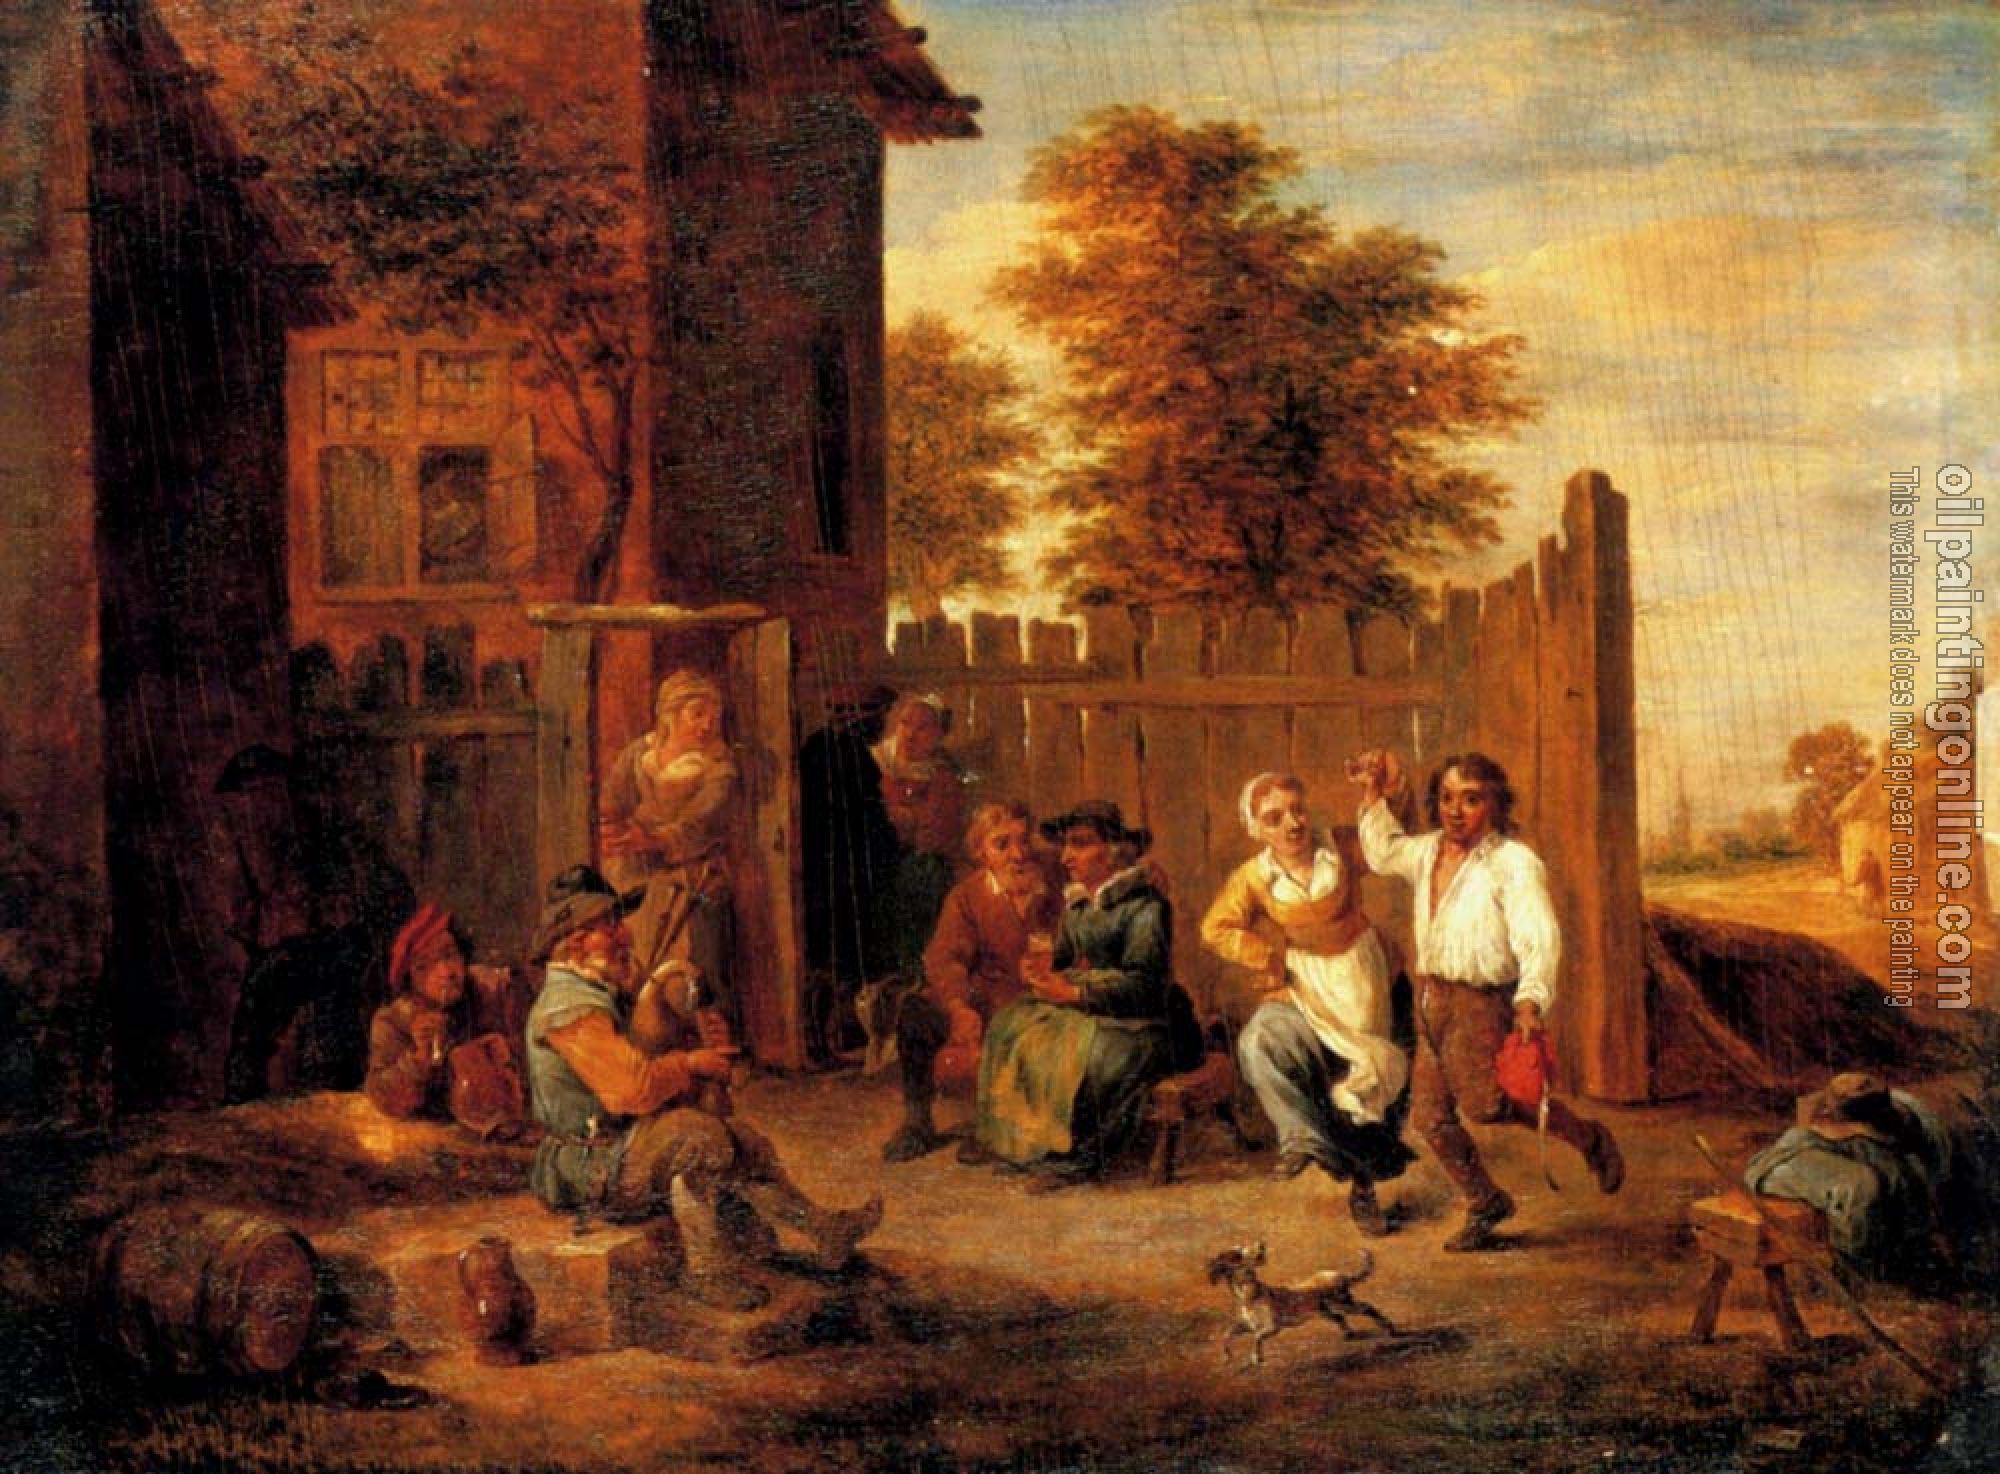 David Teniers the Younger - Peasants Merrymaking Outside An Inn